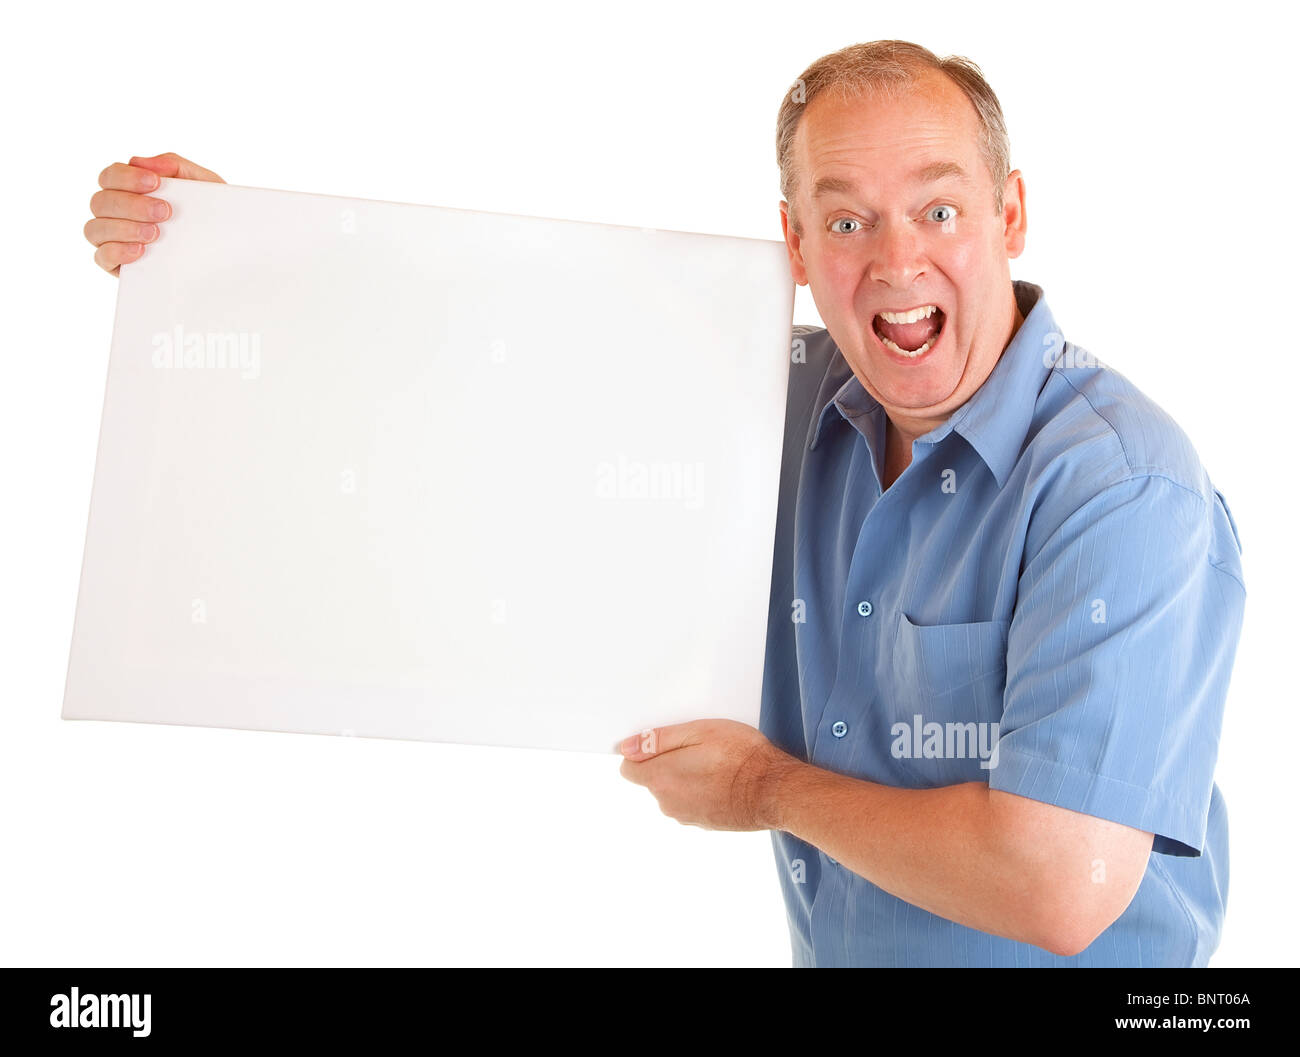 A man is holding and showing a blank white sign. Stock Photo